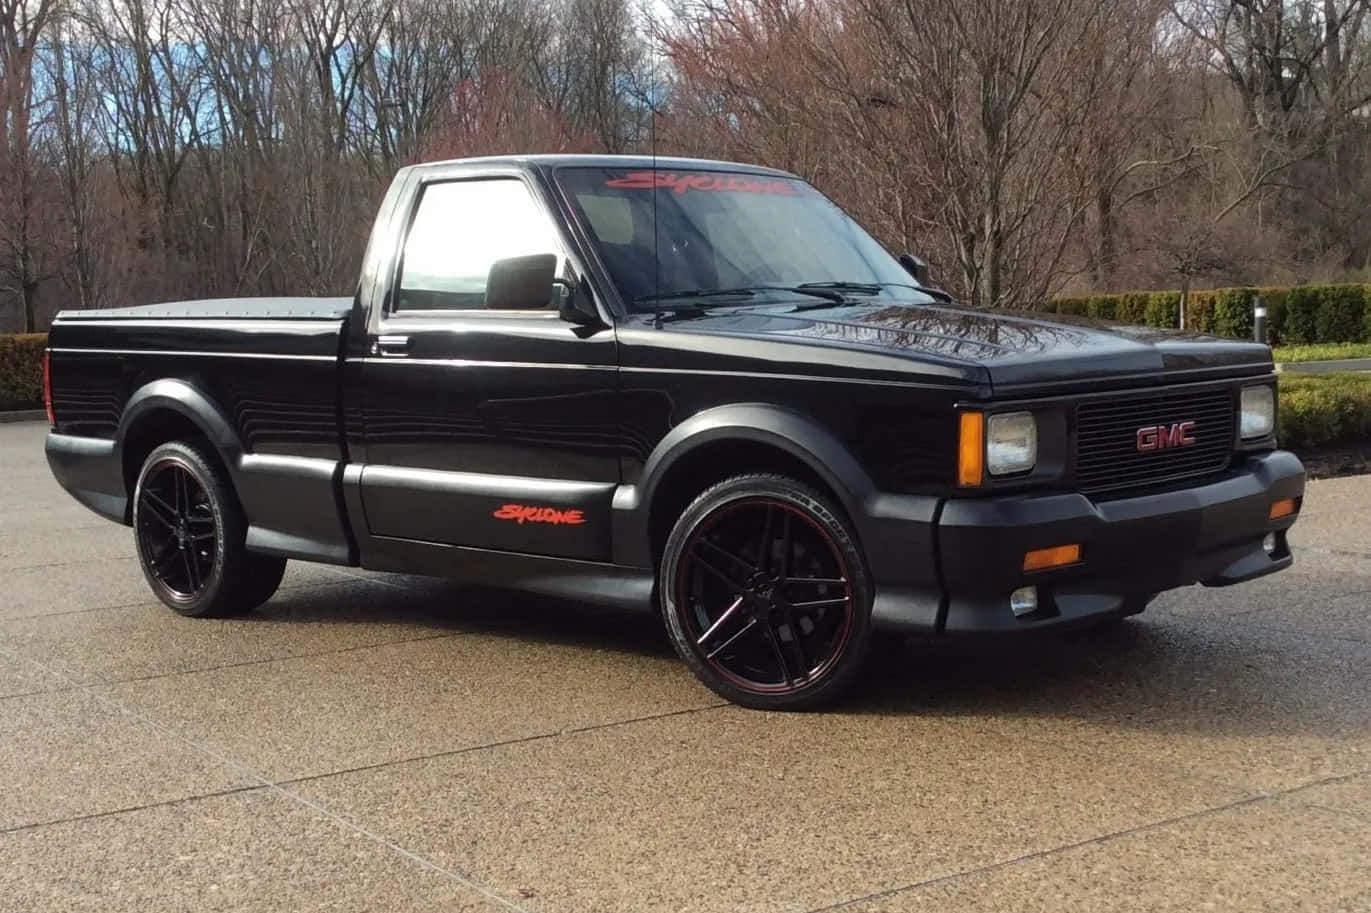 A powerful GMC Syclone in action Wallpaper